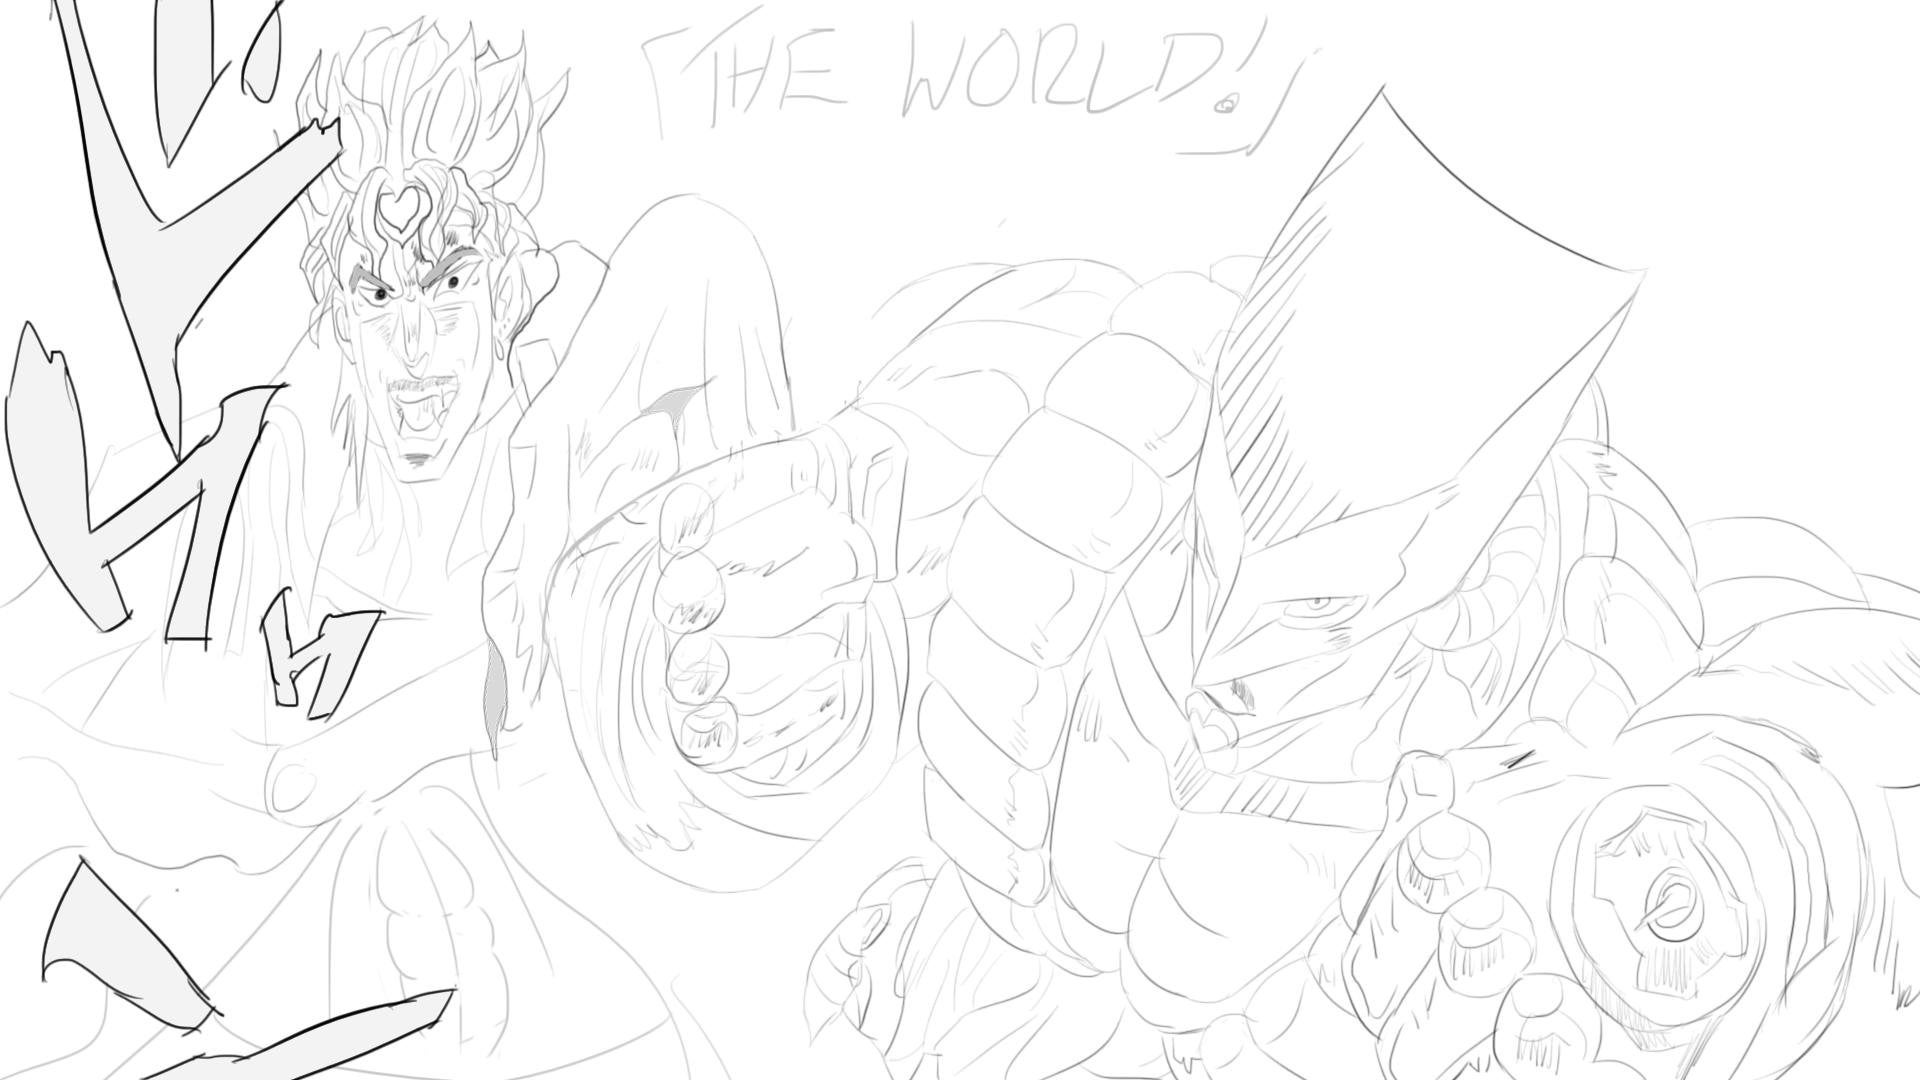 FANART] DIO and The World : r/StardustCrusaders